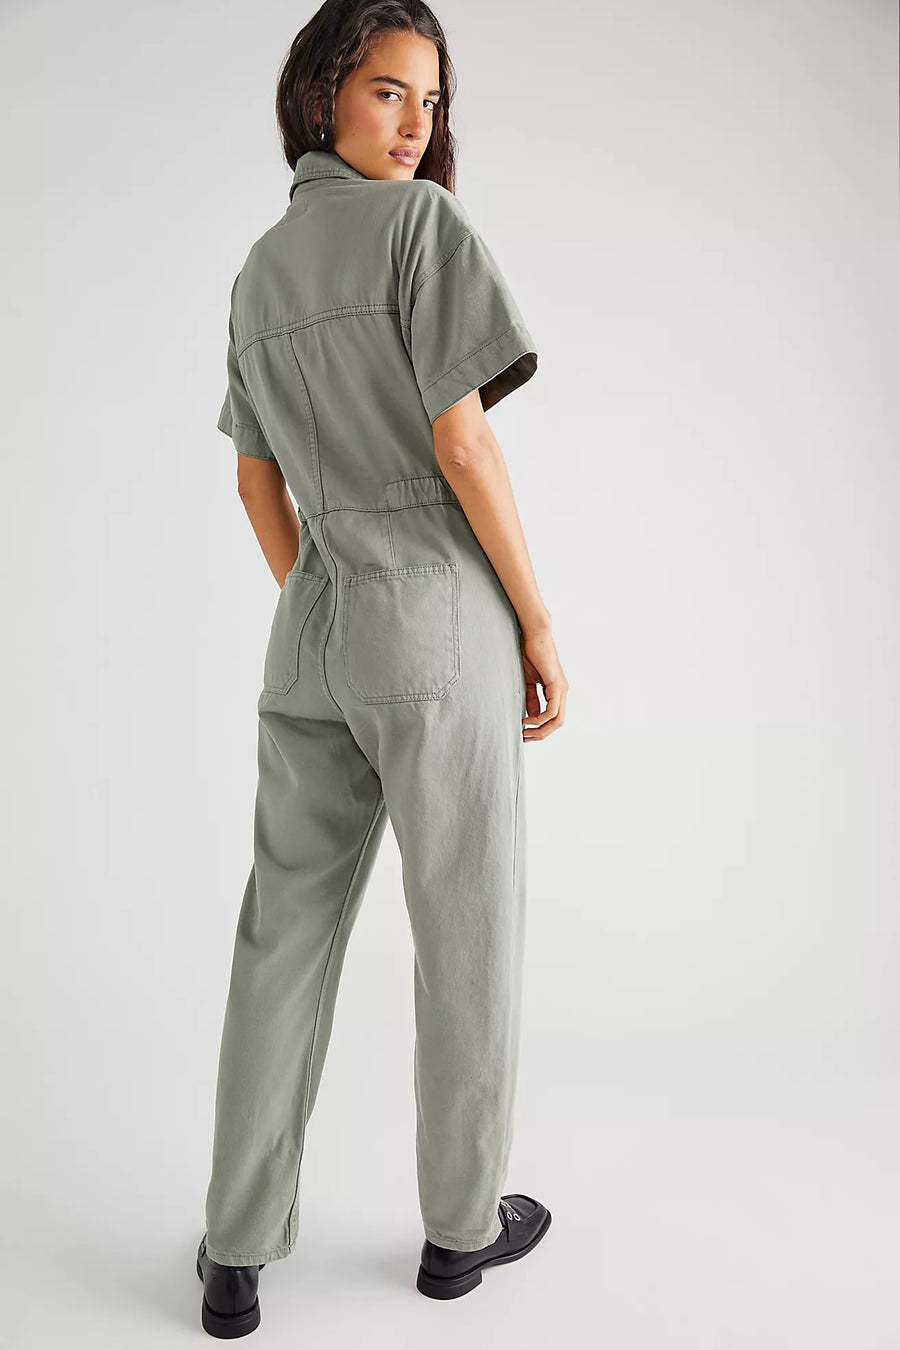 Free People Marci Jumpsuit - Washed Army